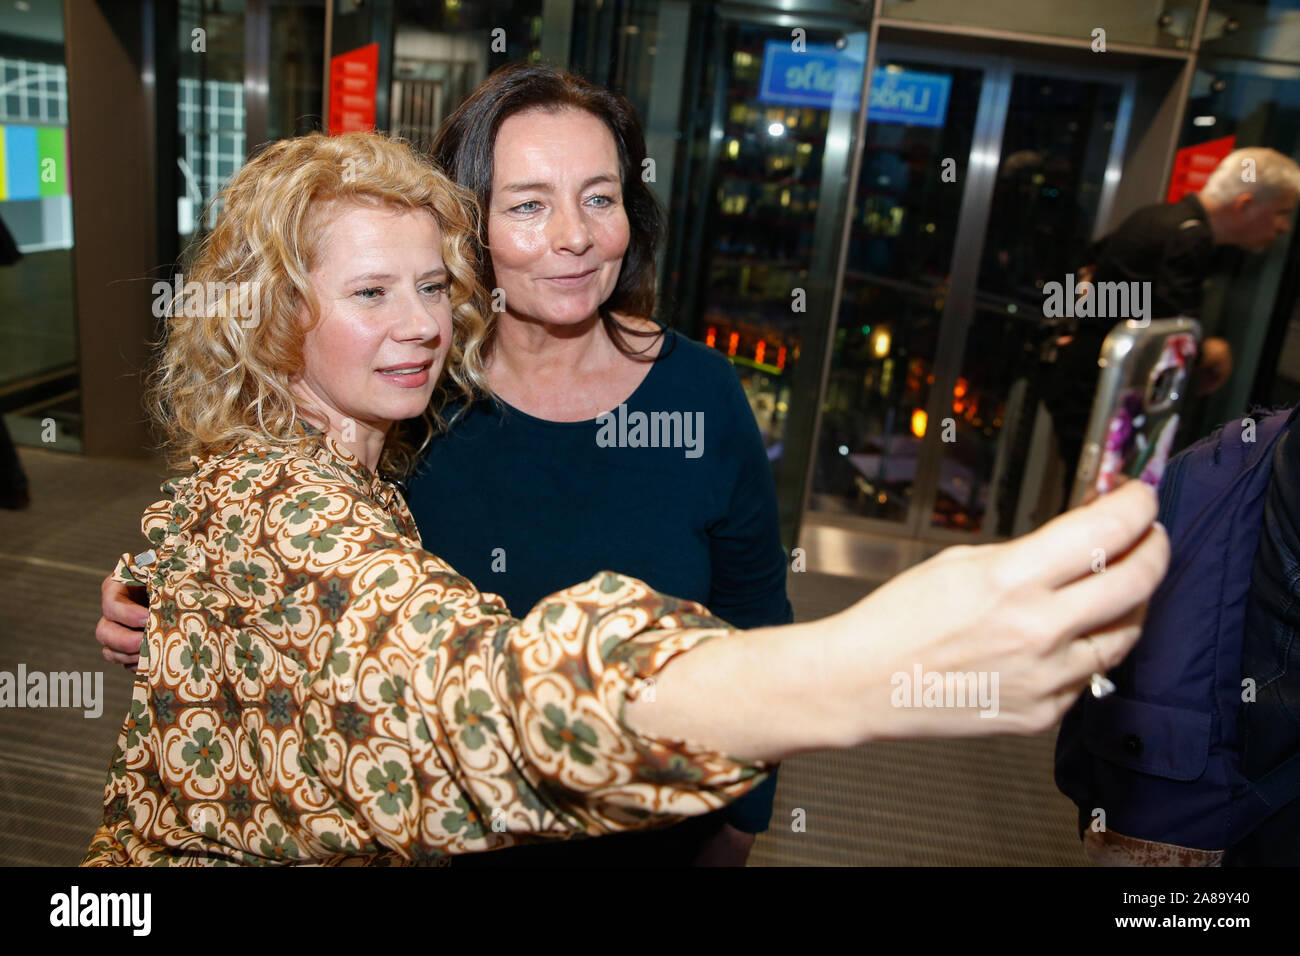 Berlin, Germany. 07th Nov, 2019. Actor Jacqueline Svilarov (l) makes a selfie with a visitor at the autograph session in the Deutsche Kinemathek - Museum für Film und Fernsehen. 373 episodes of the series 'Lindenstraße' were added to the media library of the 'Deutsche Kinemathek'. They were ordered in the points 'live, die, celebrate wedding'. Credit: Gerald Matzka/dpa-Zentralbild/dpa/Alamy Live News Stock Photo